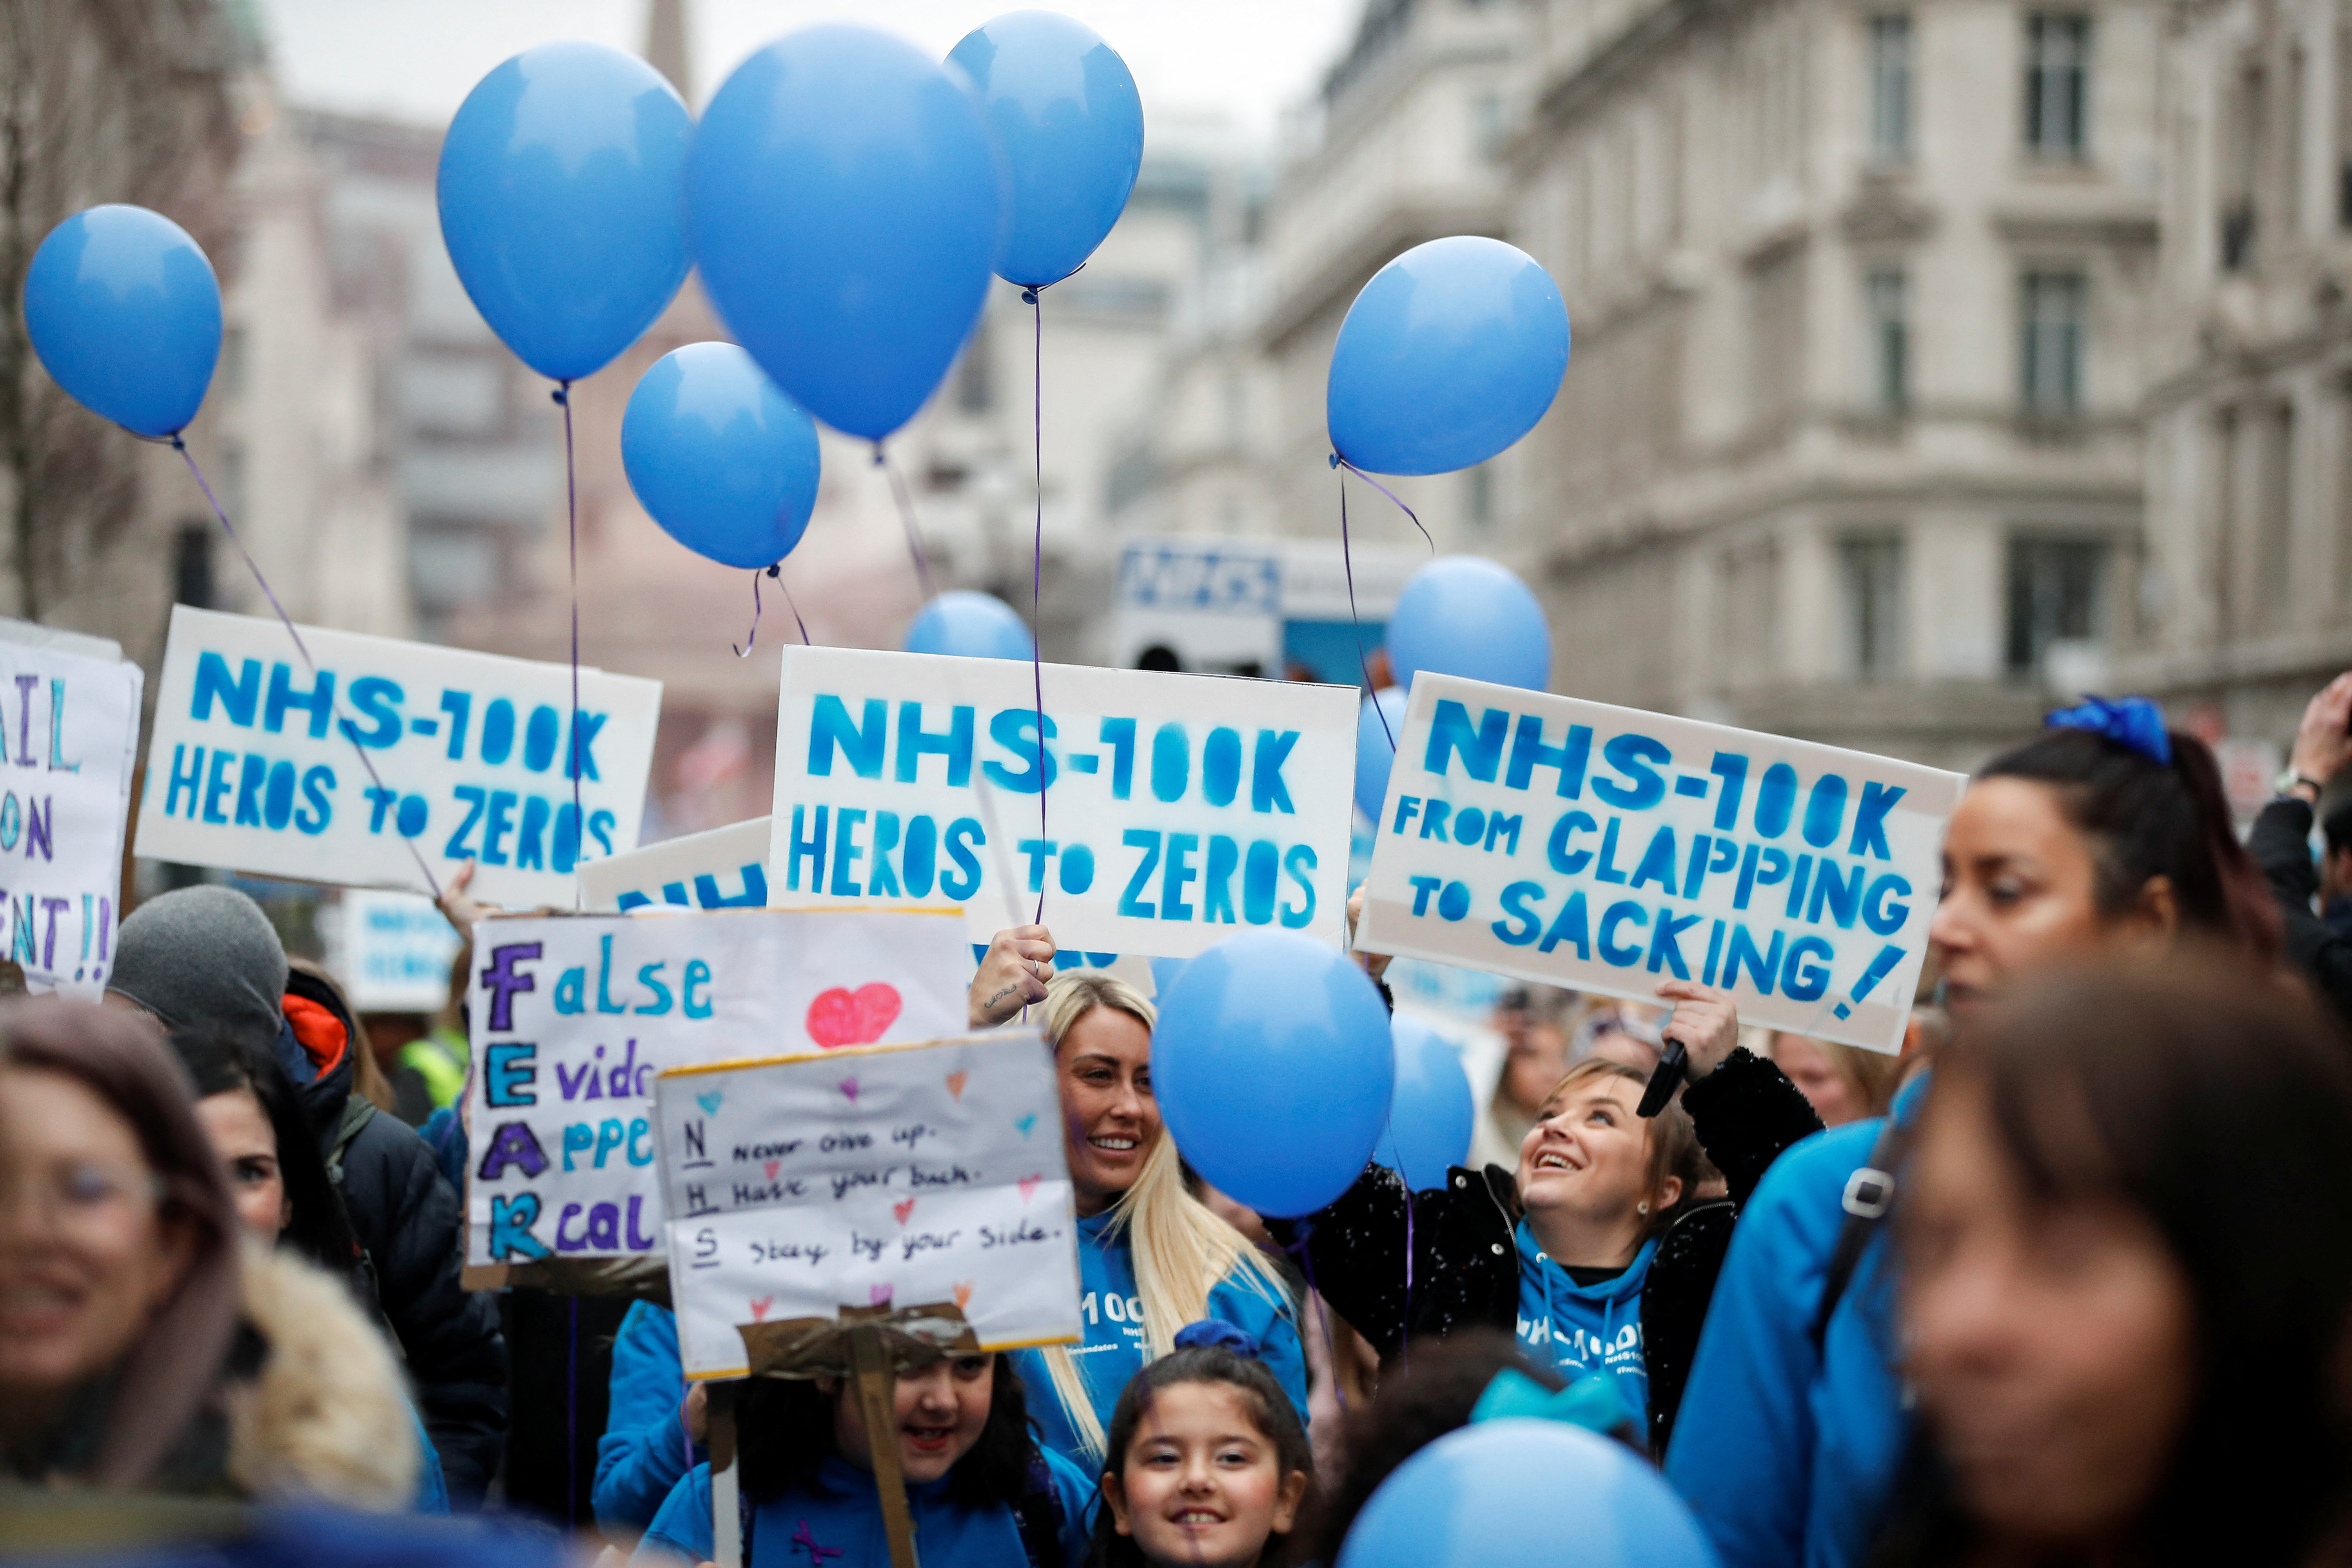 NHS staff march in a protest against vaccine mandates, in London